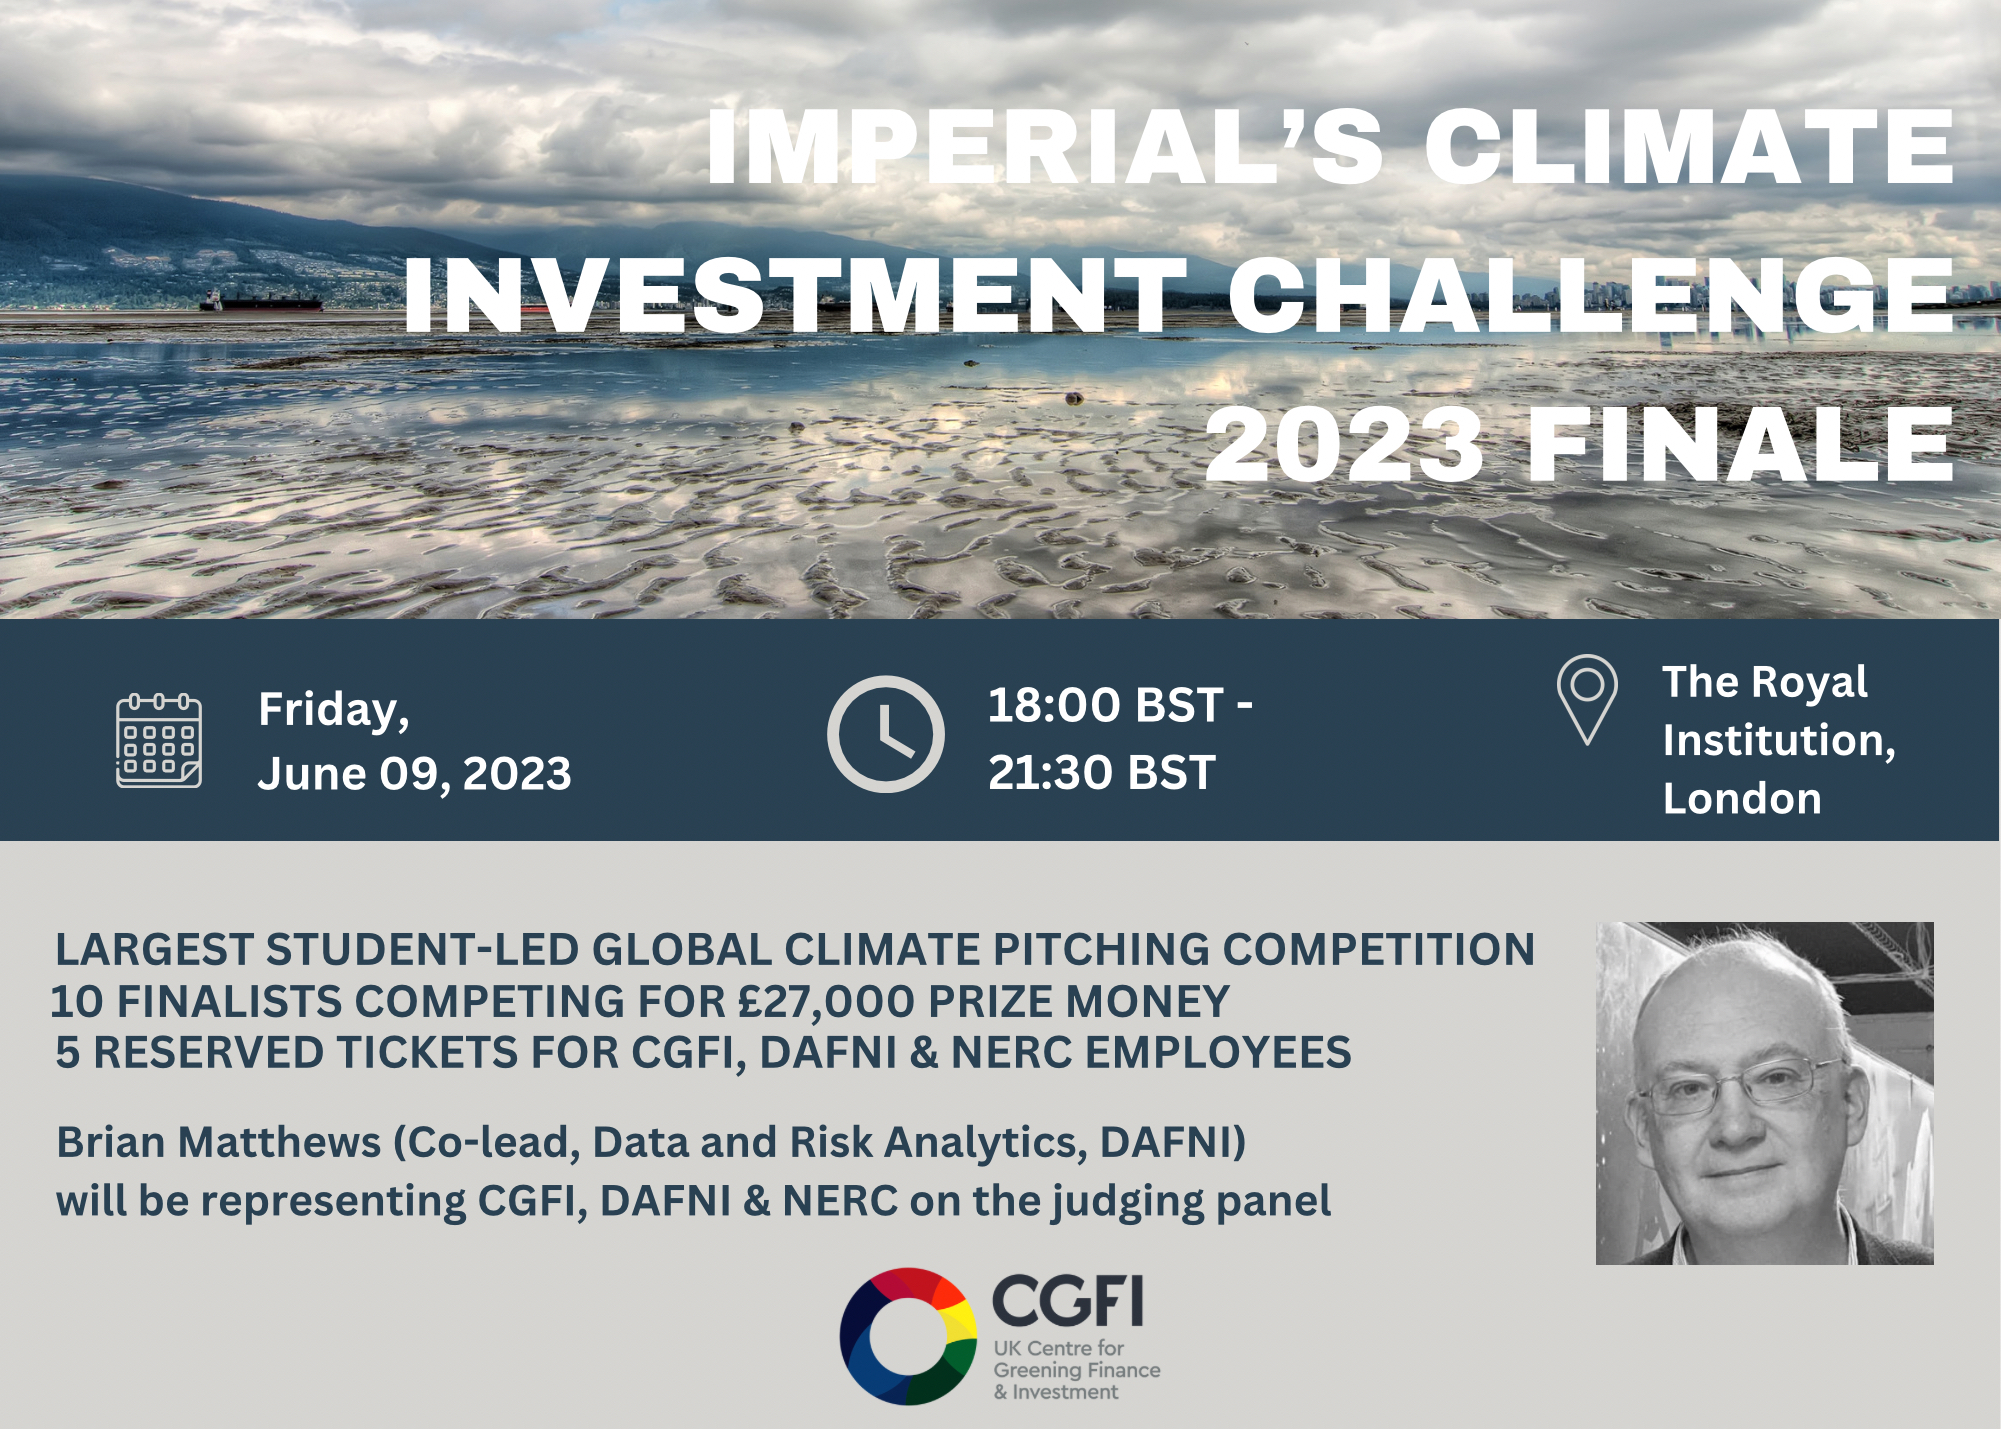 Climate Investment Challenge Advert